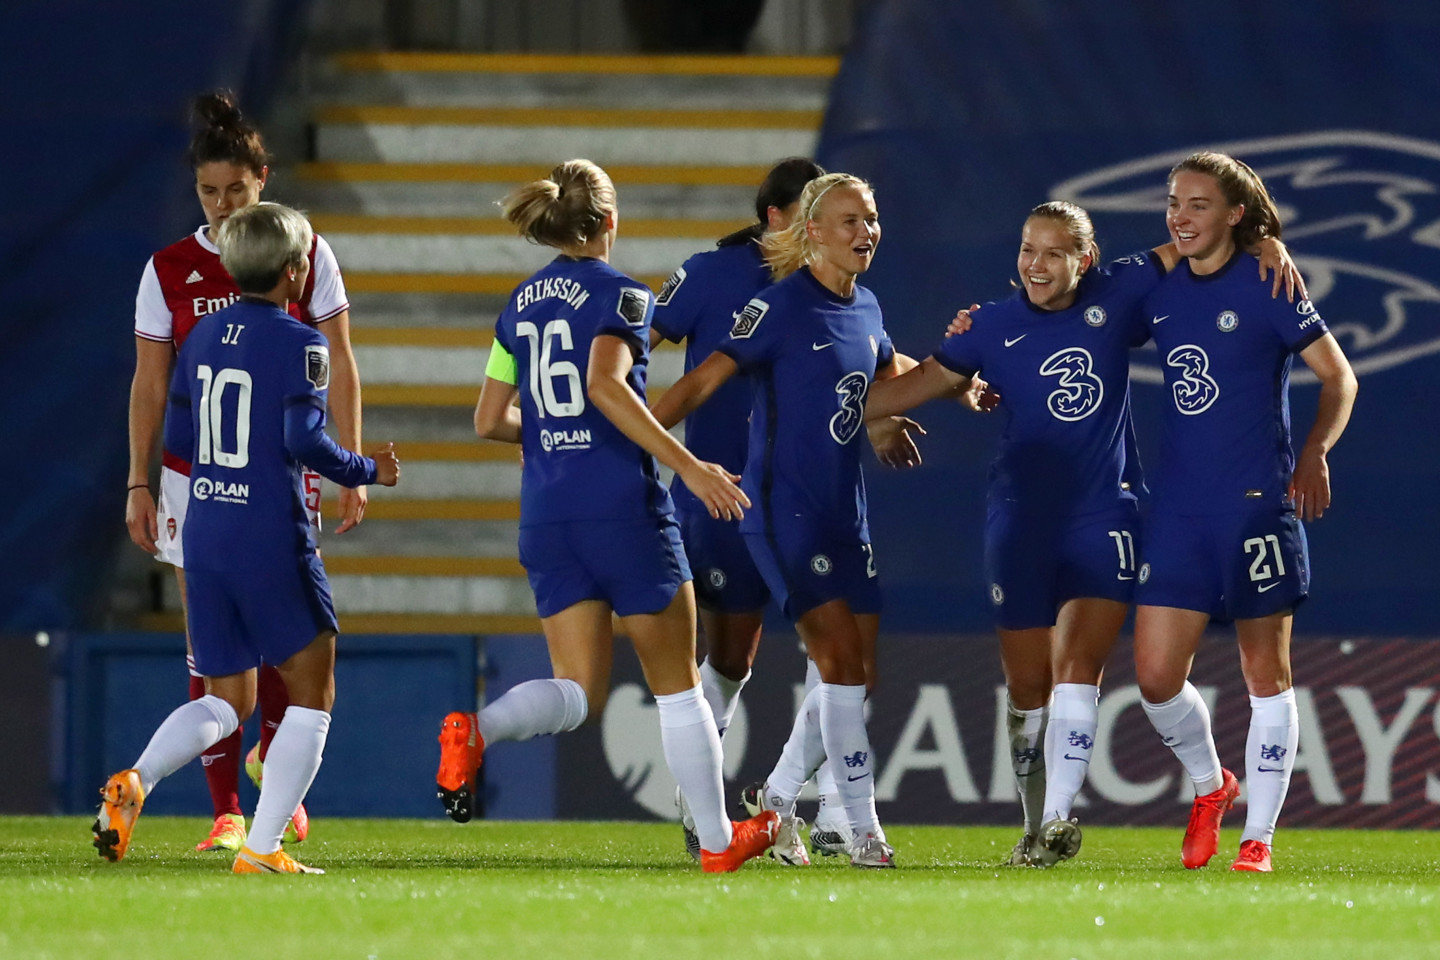 Arsenal Women vs Chelsea Women preview: Kick-off time, how to